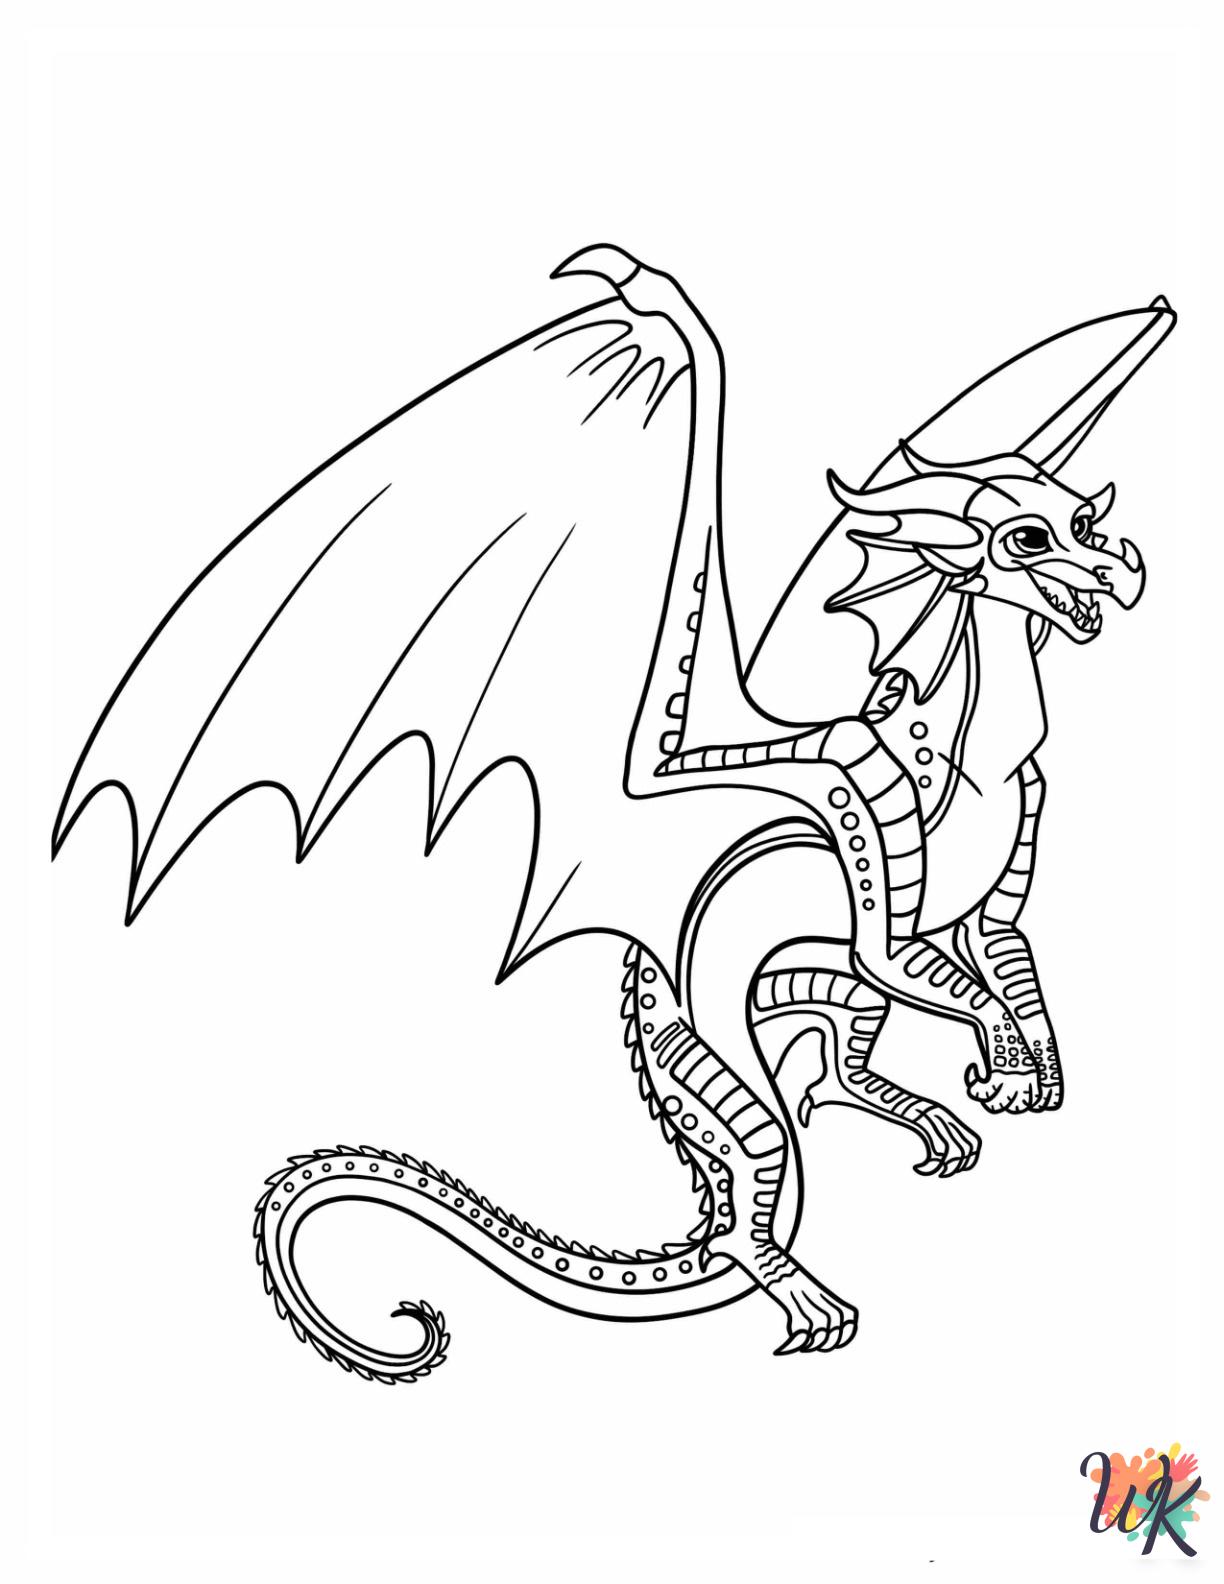 Wings Of Fire coloring pages for adults easy